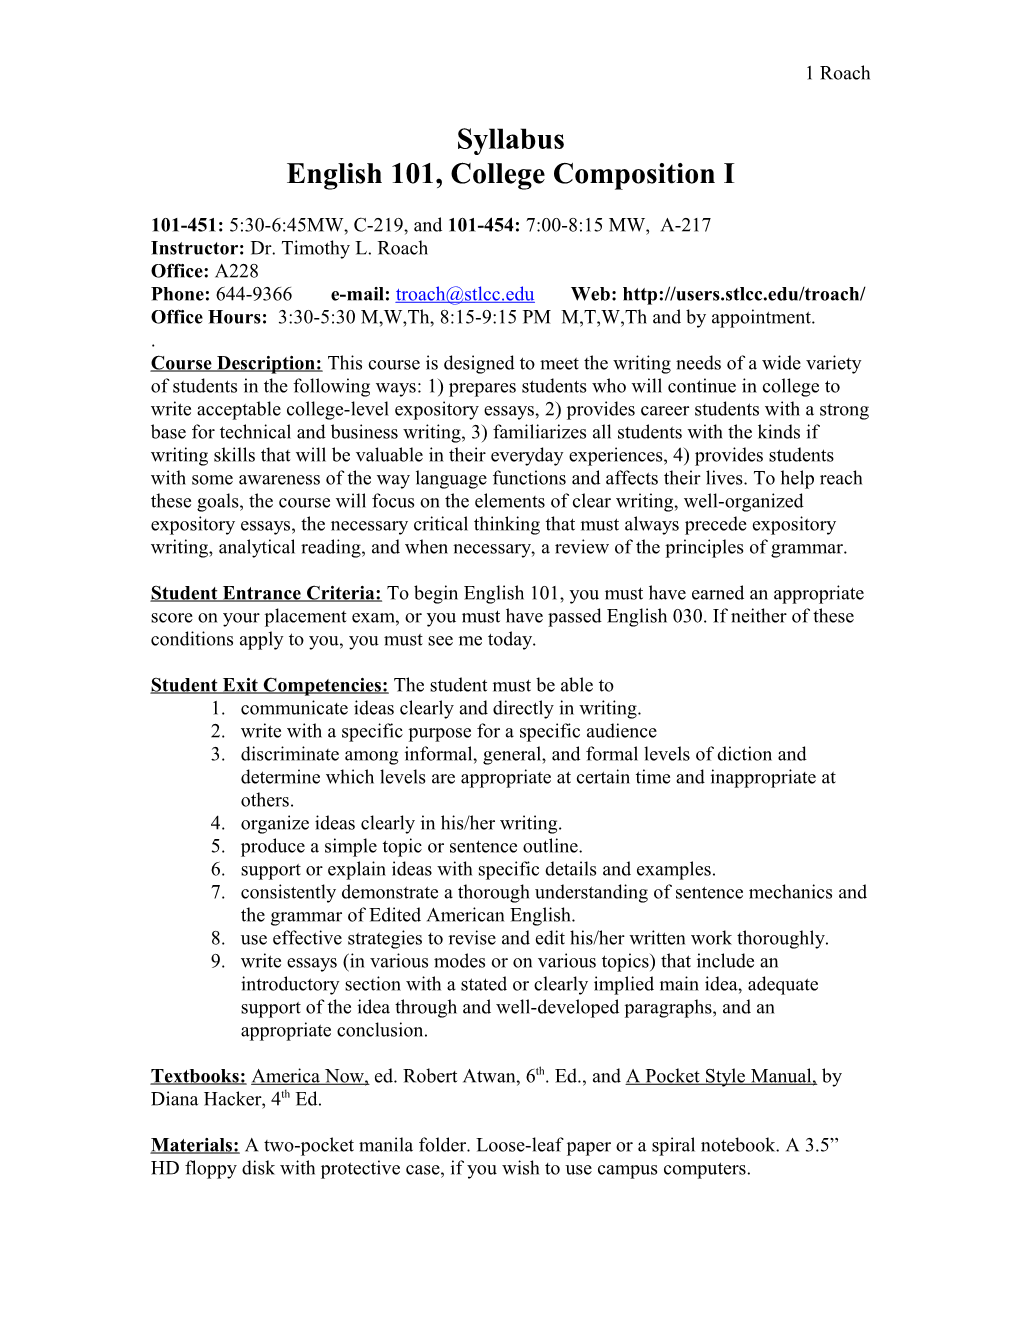 English 101, College Composition I